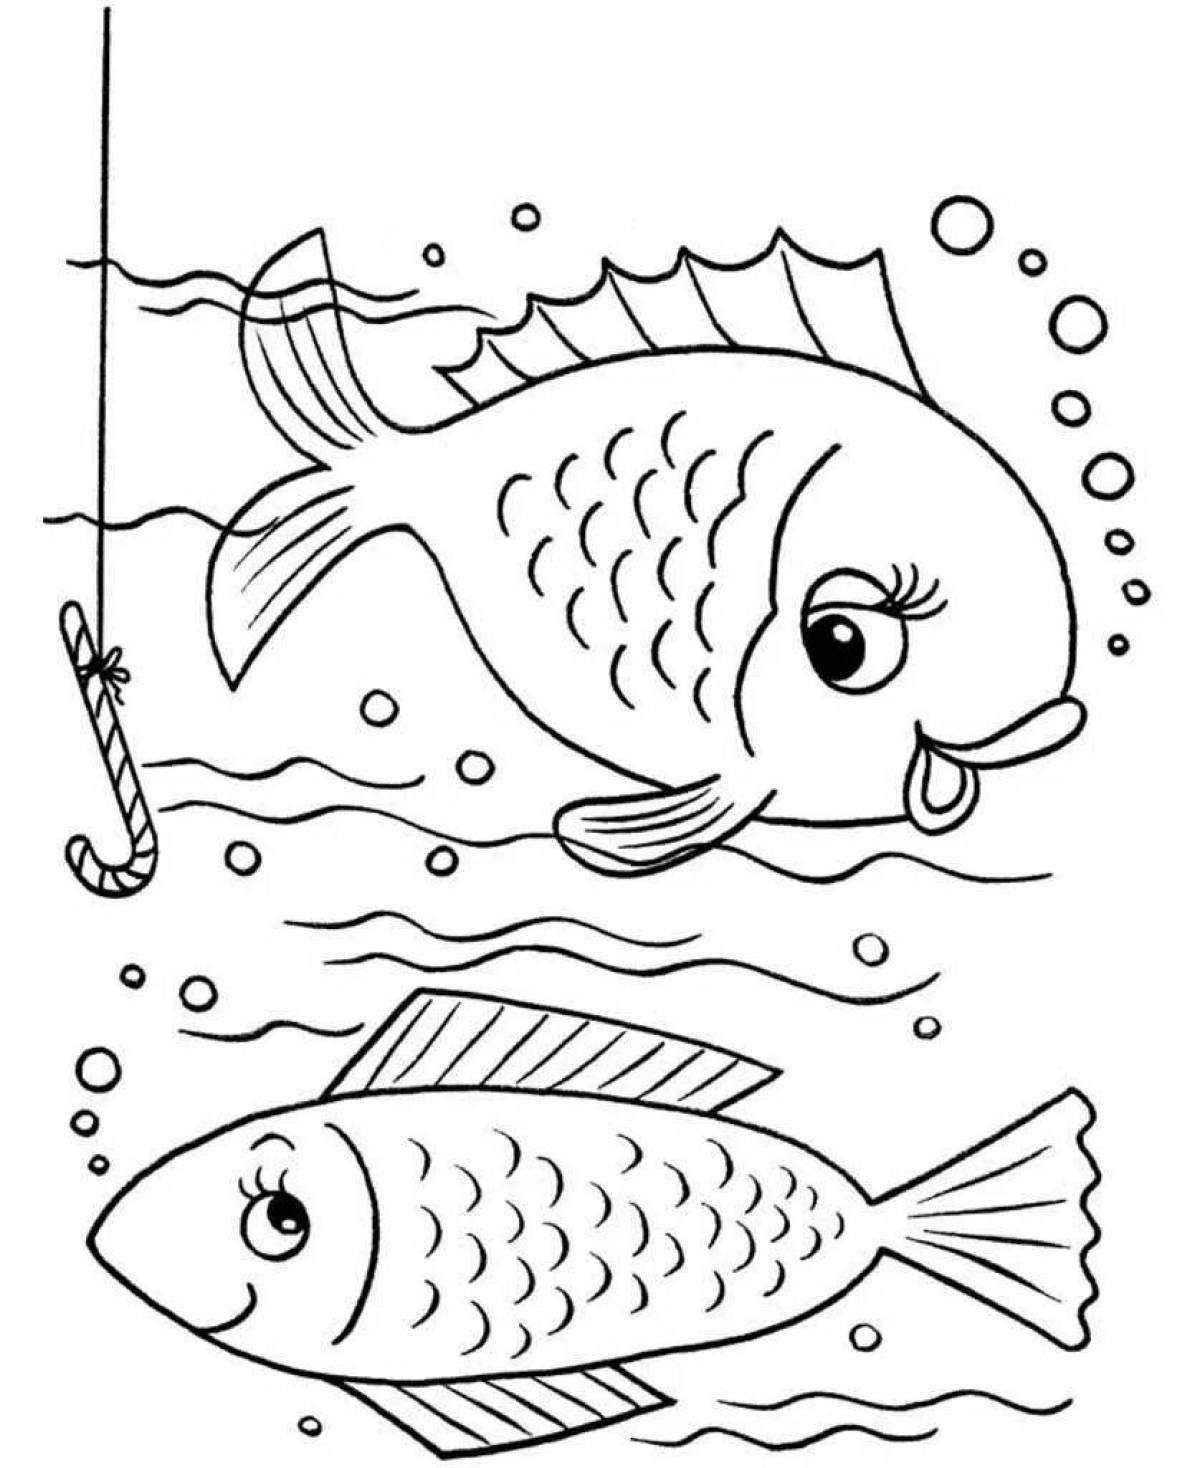 Coloring for colorful fish for children 6-7 years old